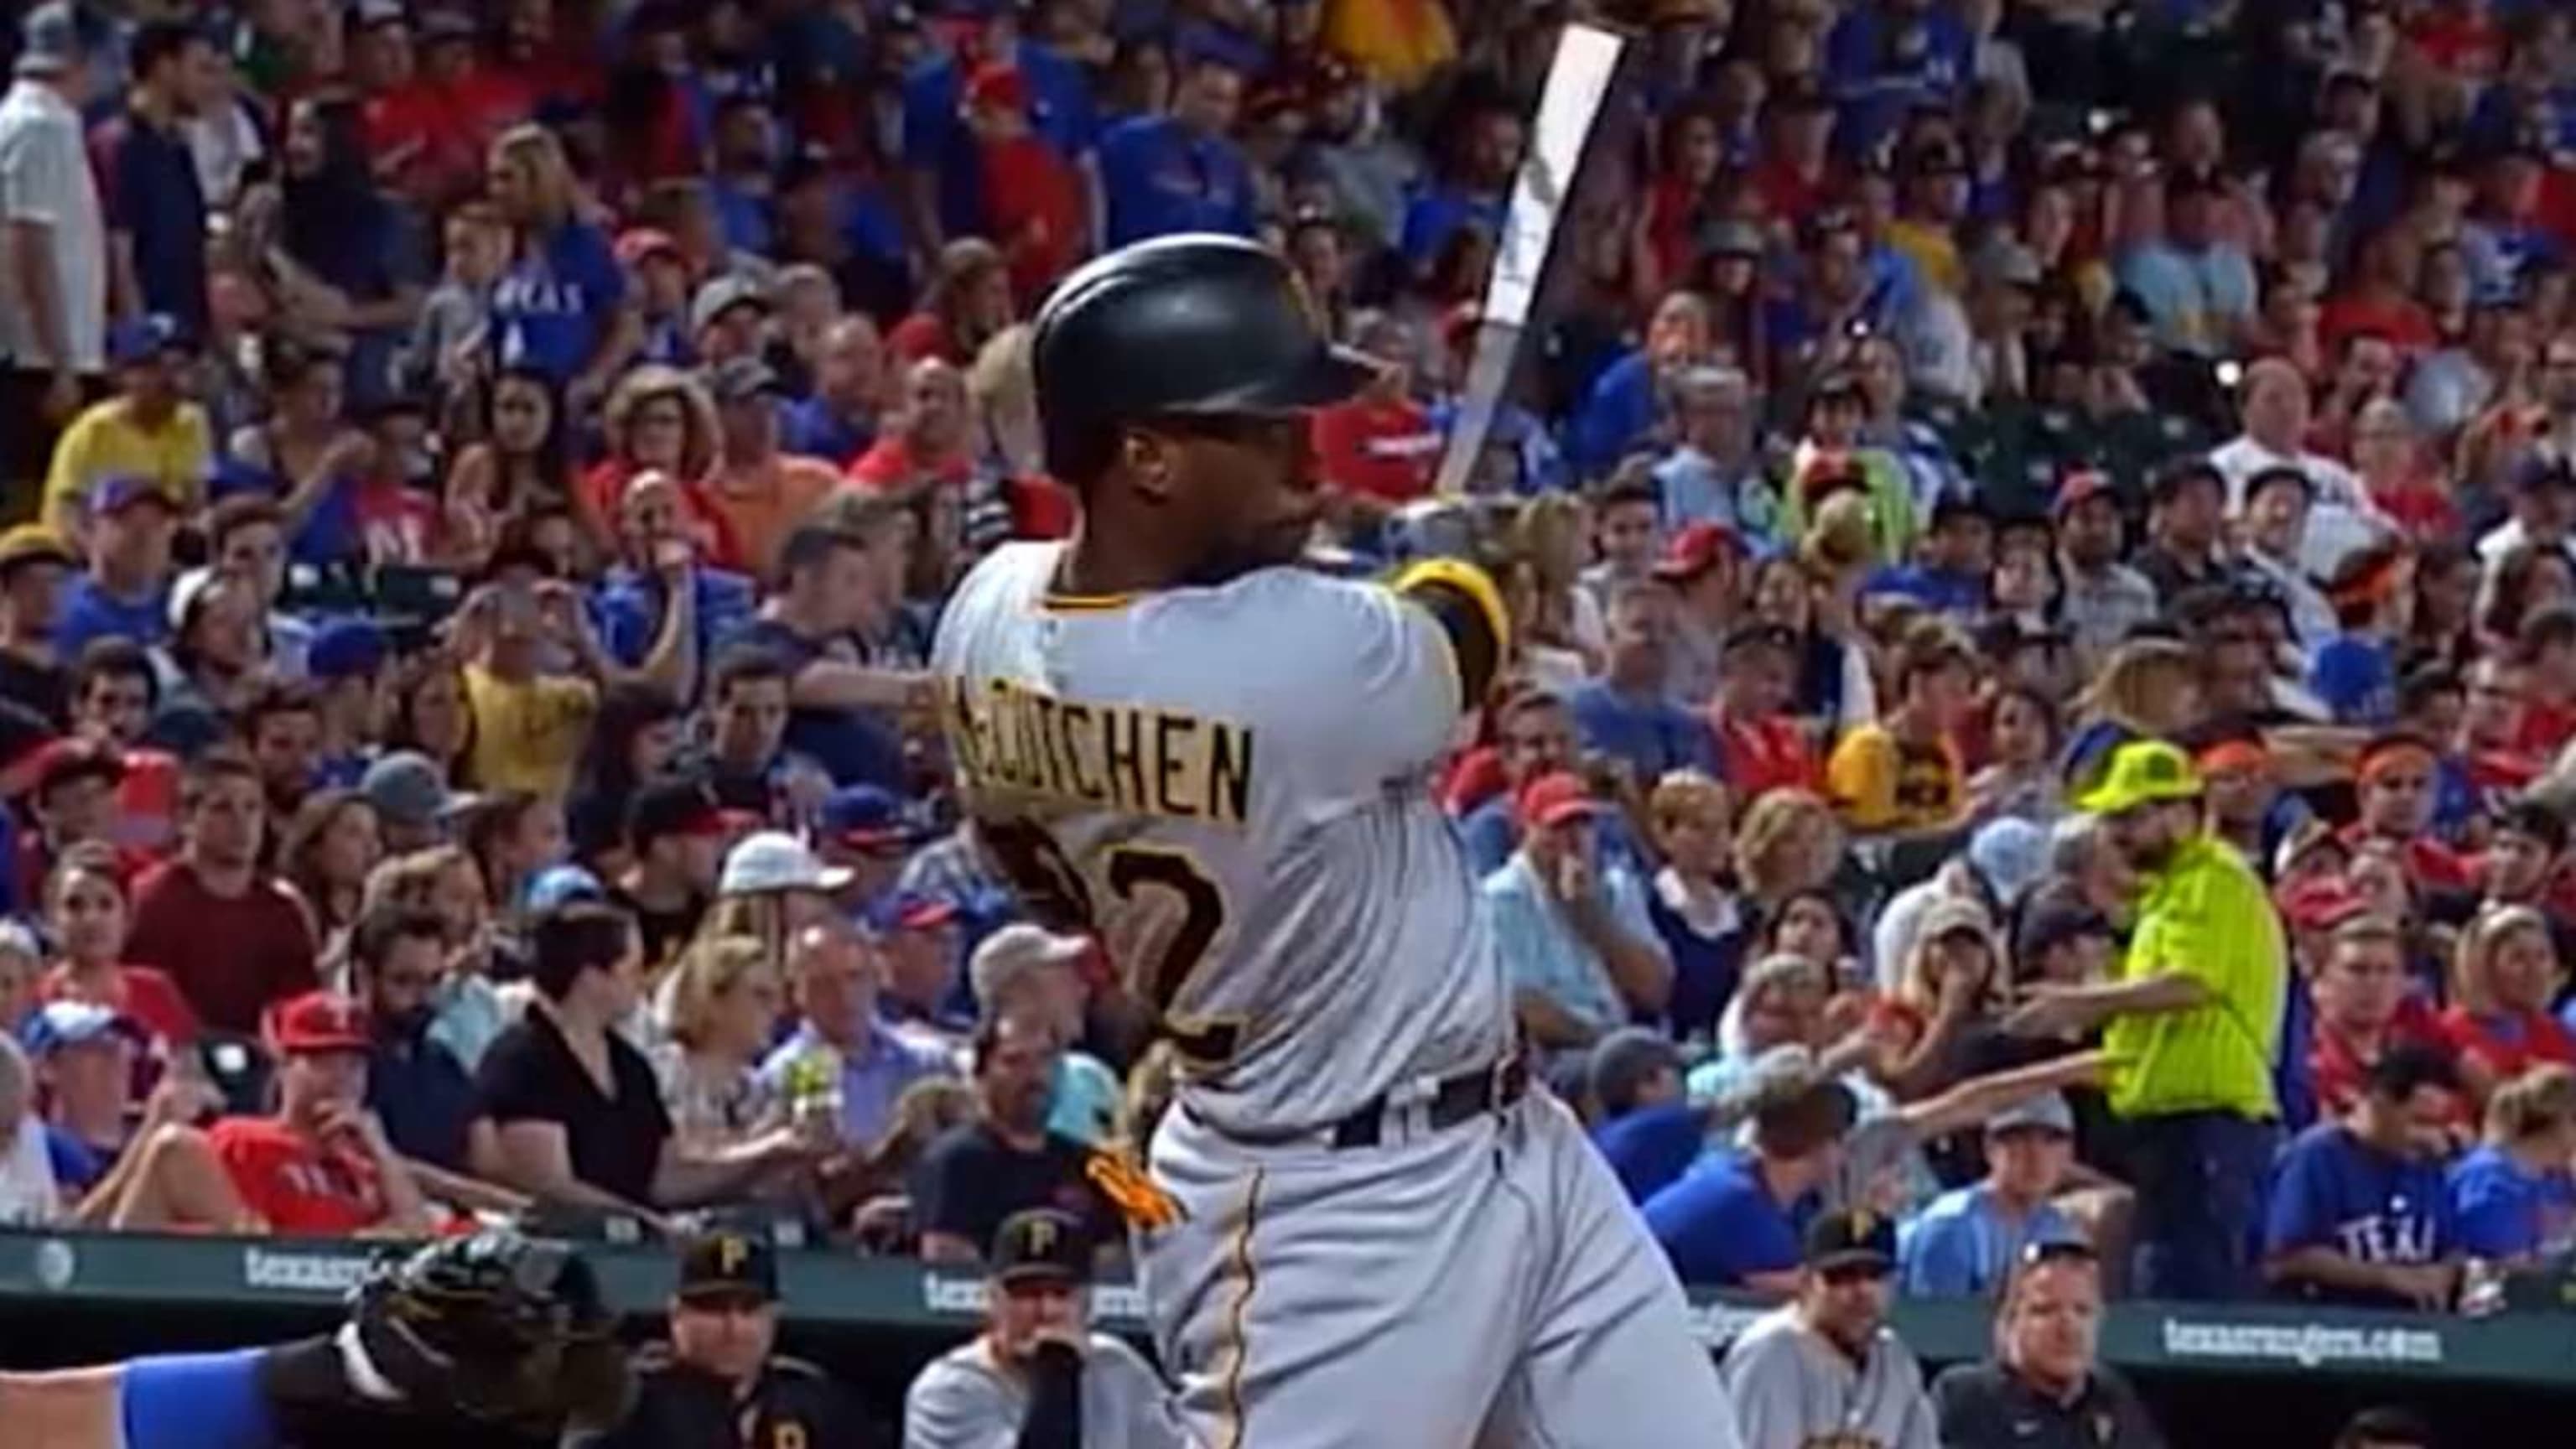 Andrew McCutchen reconnects with Pirates fans, discusses how much